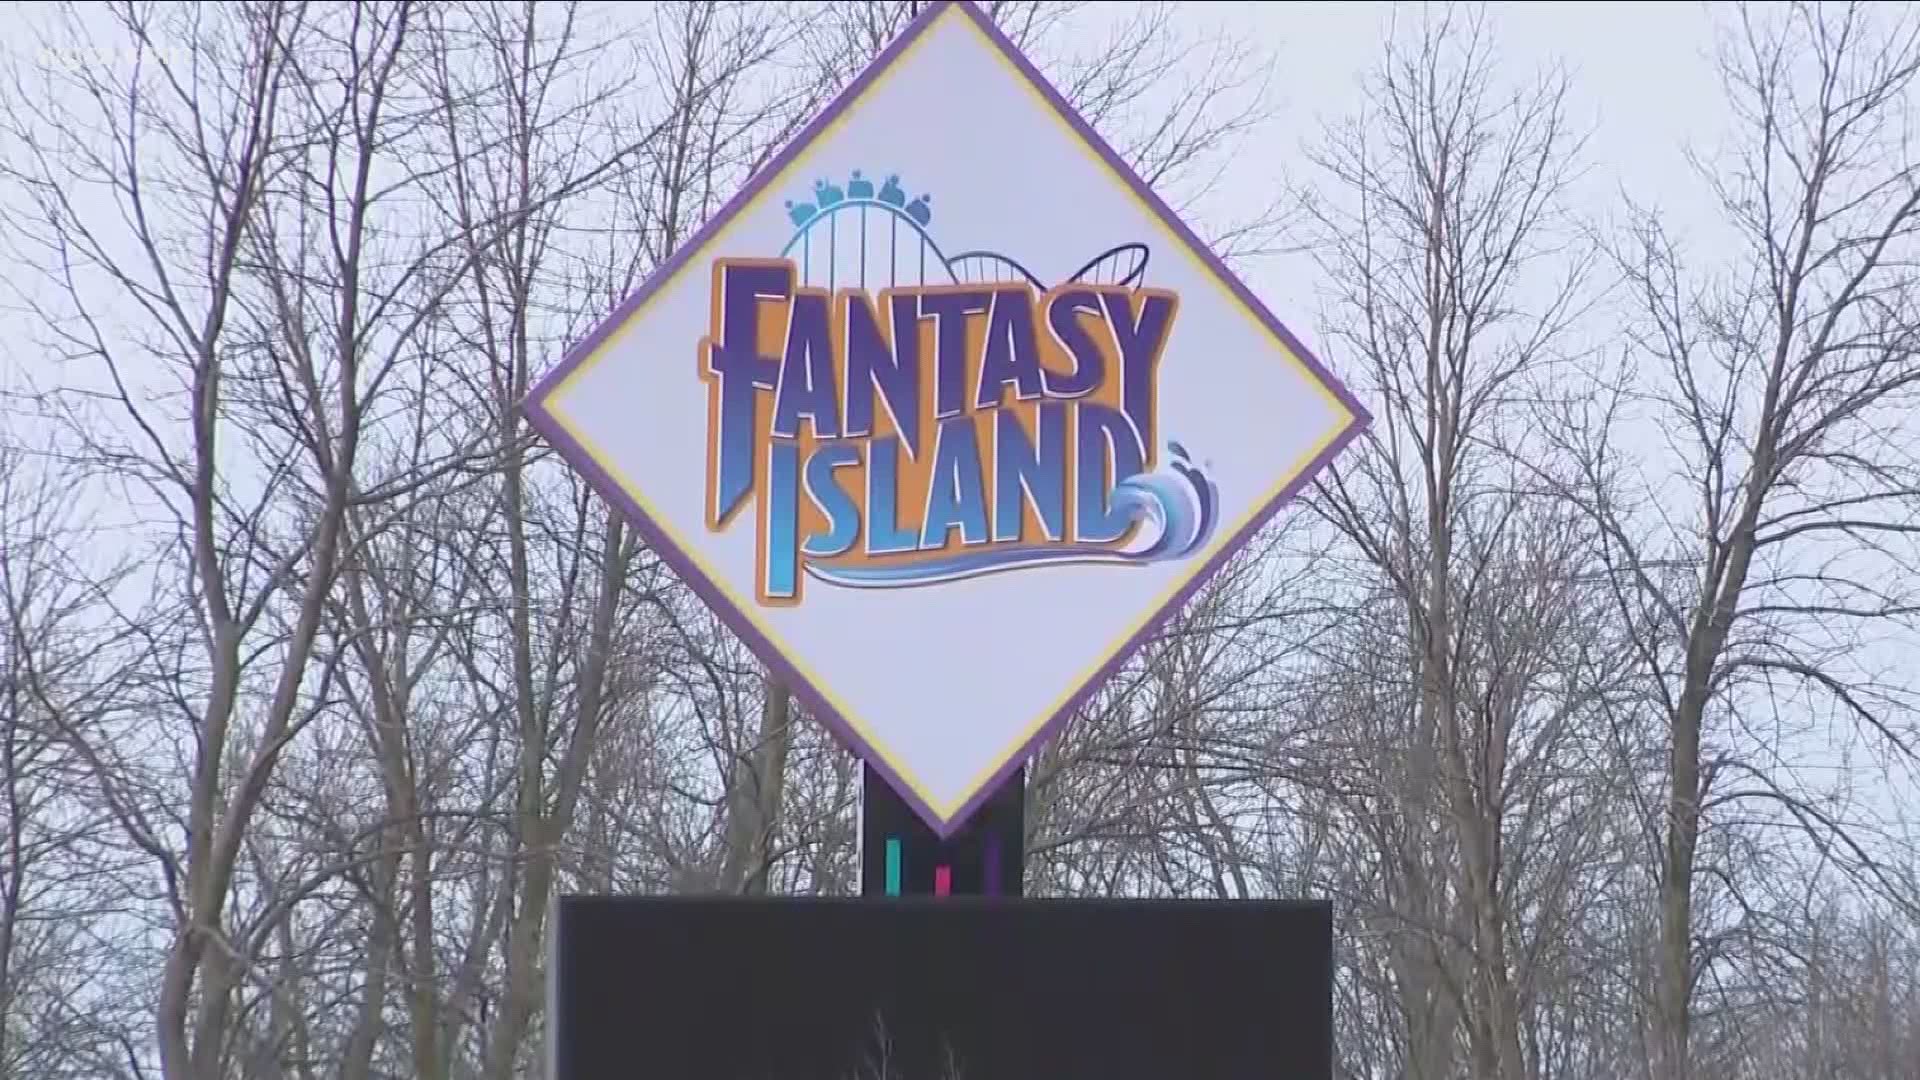 Group trying to re-open Fantasy Island